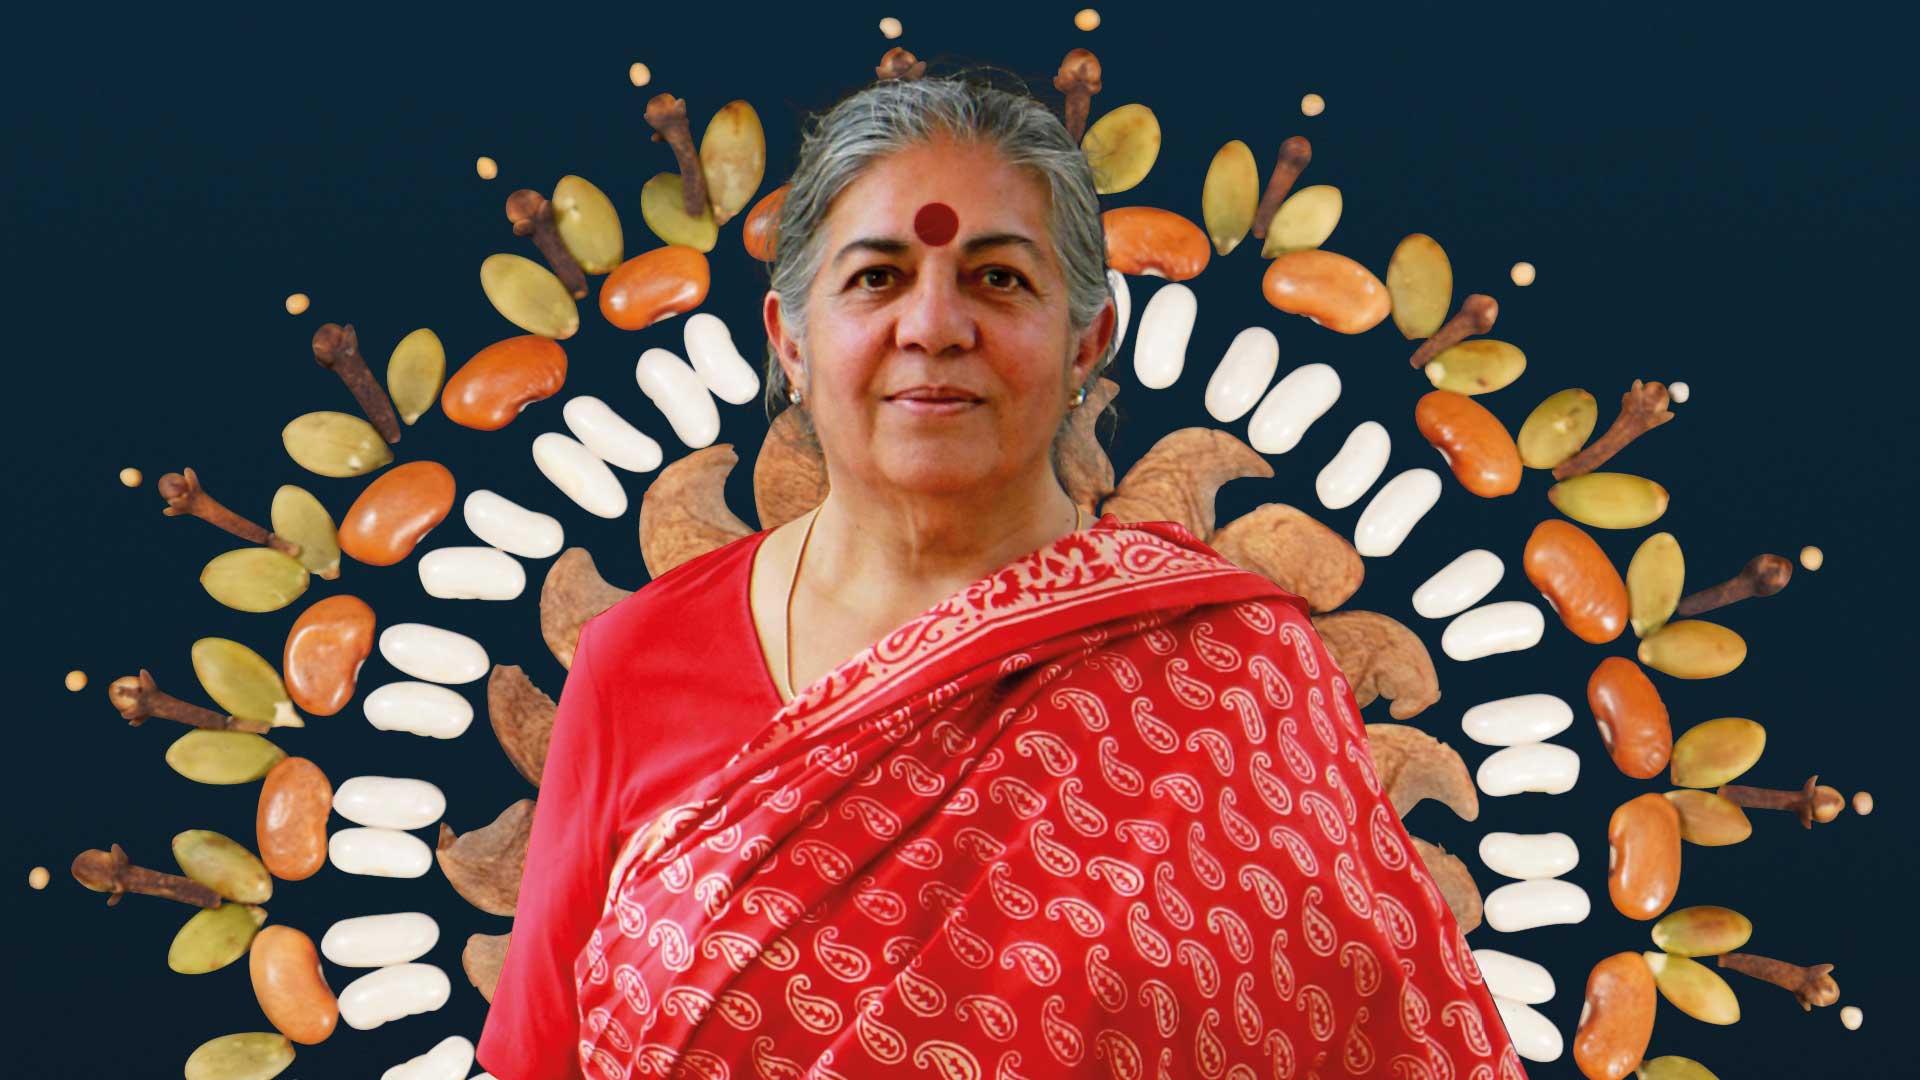 A photo of an older Indian woman in a bright red sari has been superimposed over an arrangement of differently shaped and colored seeds, giving the effect of a statue of a deity surrounded by a ring of fire